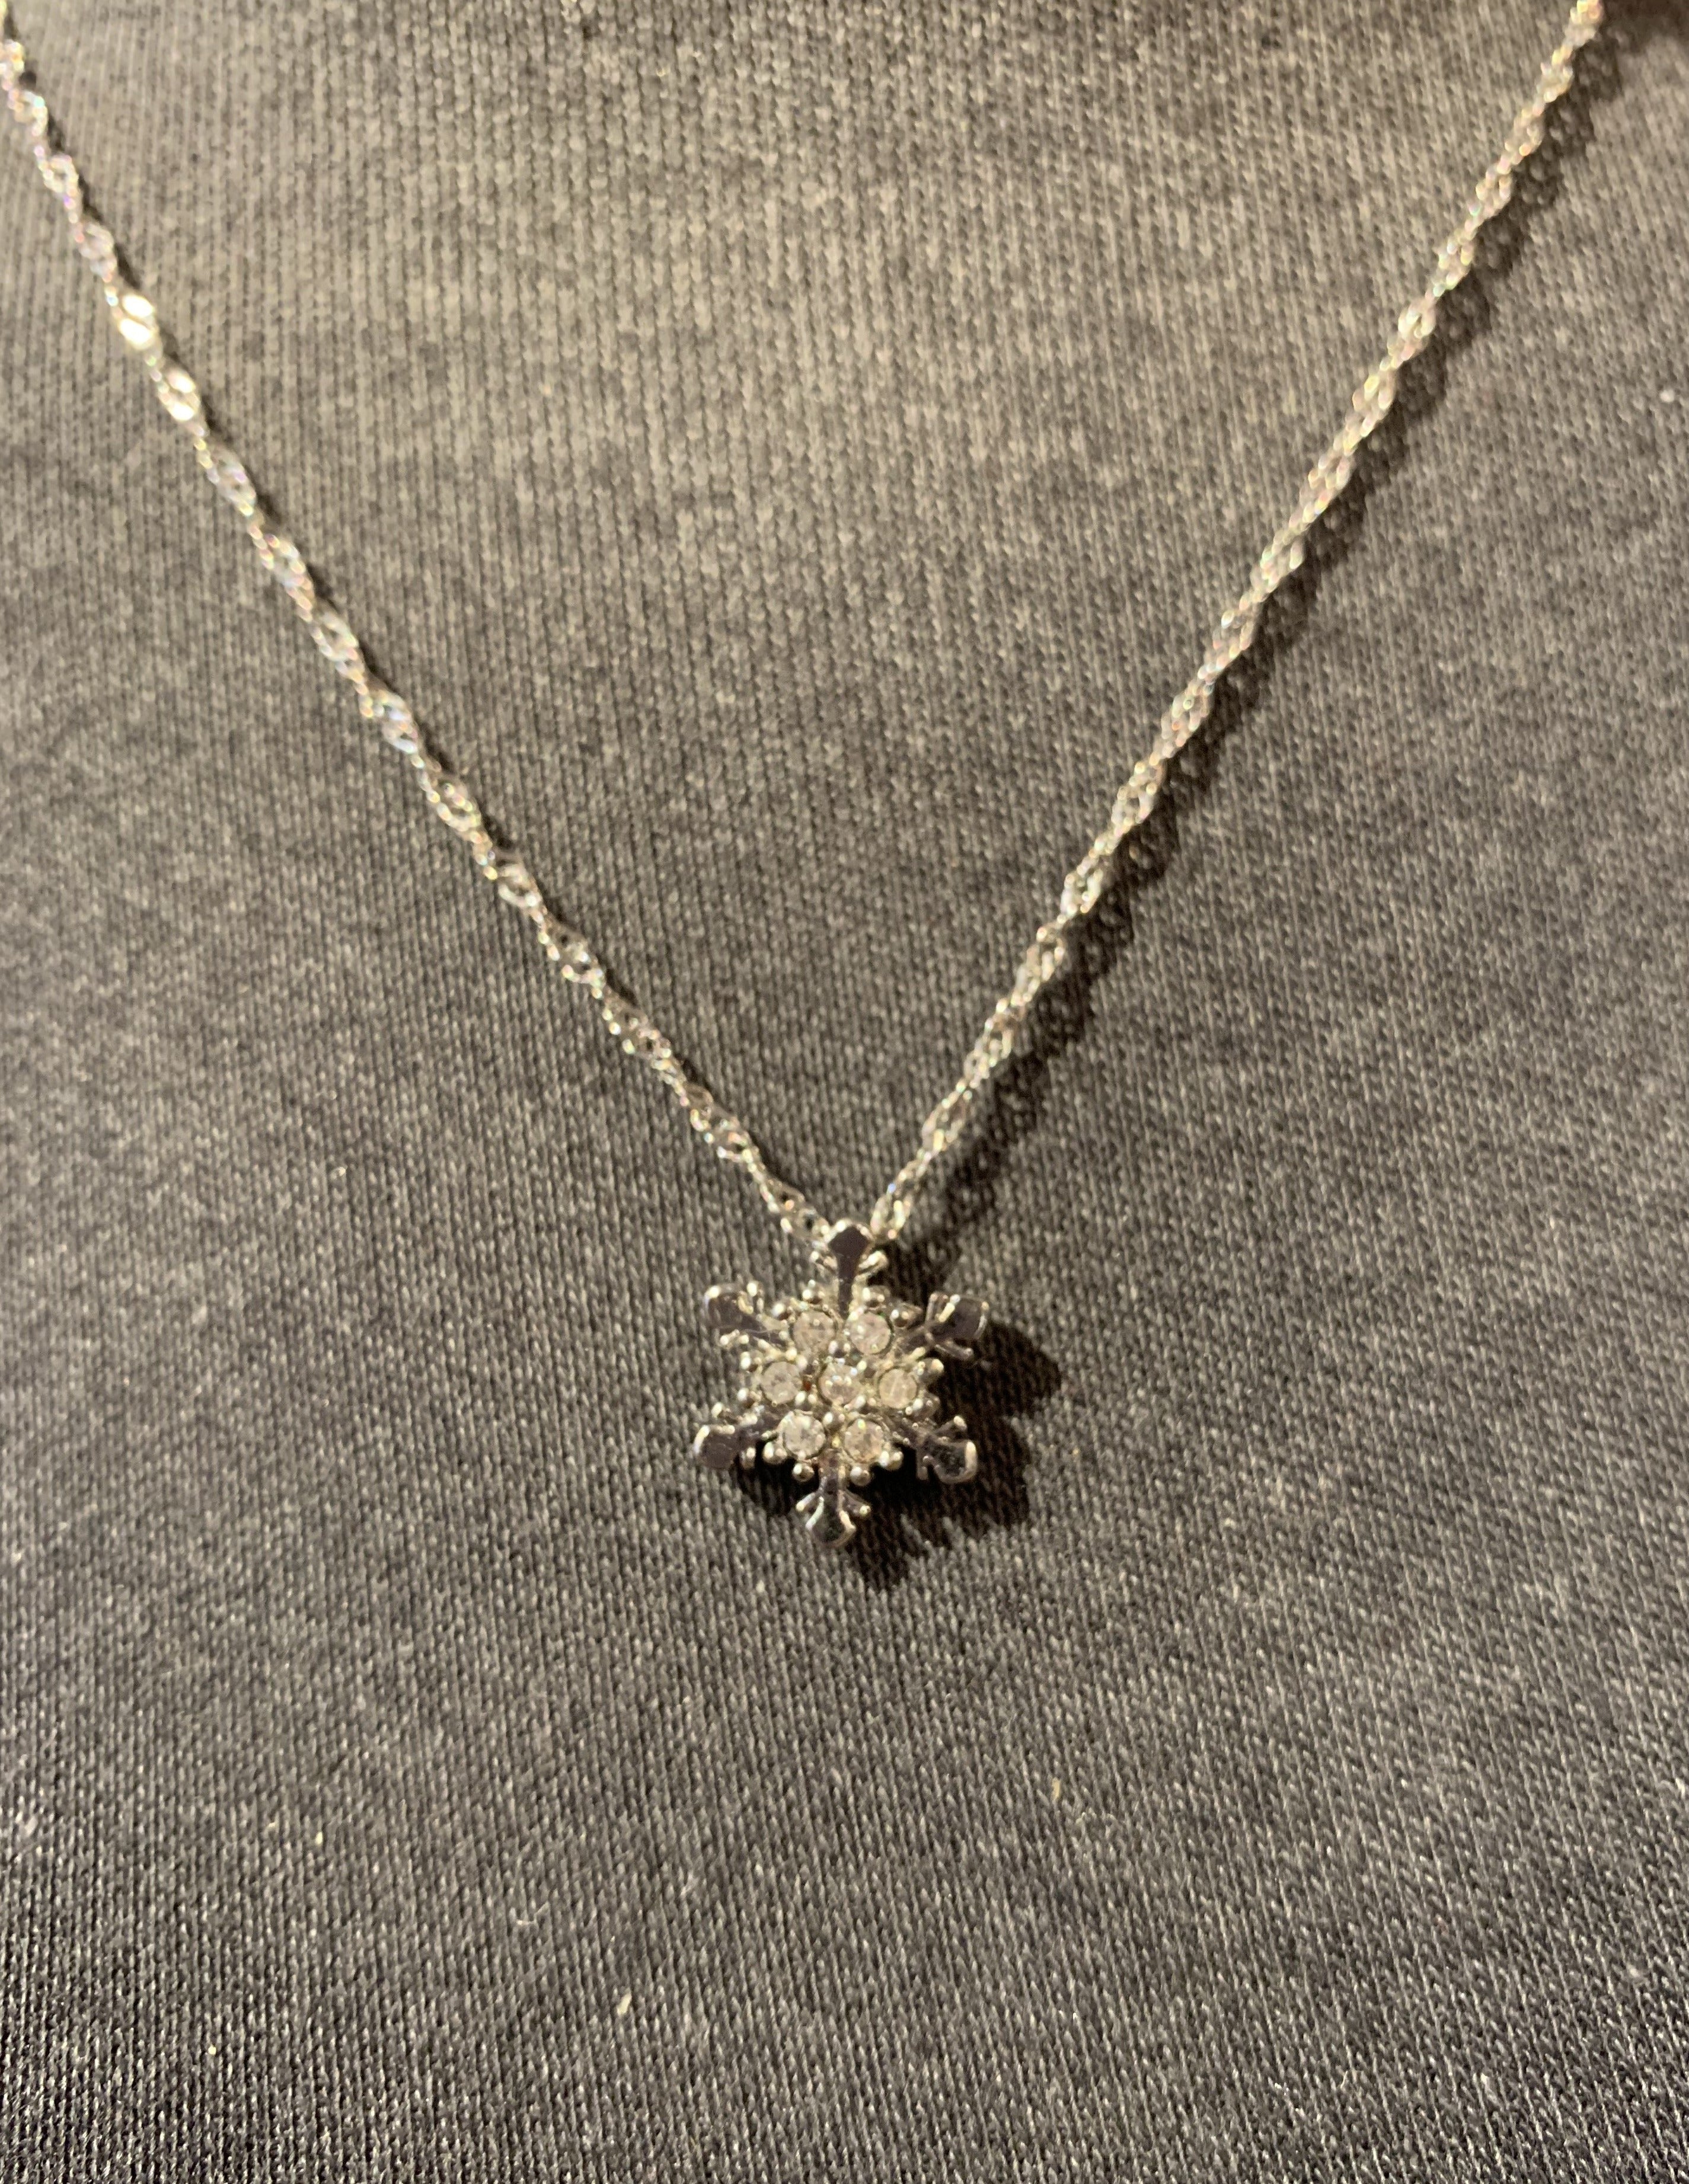 Necklace- Winter Snowflake